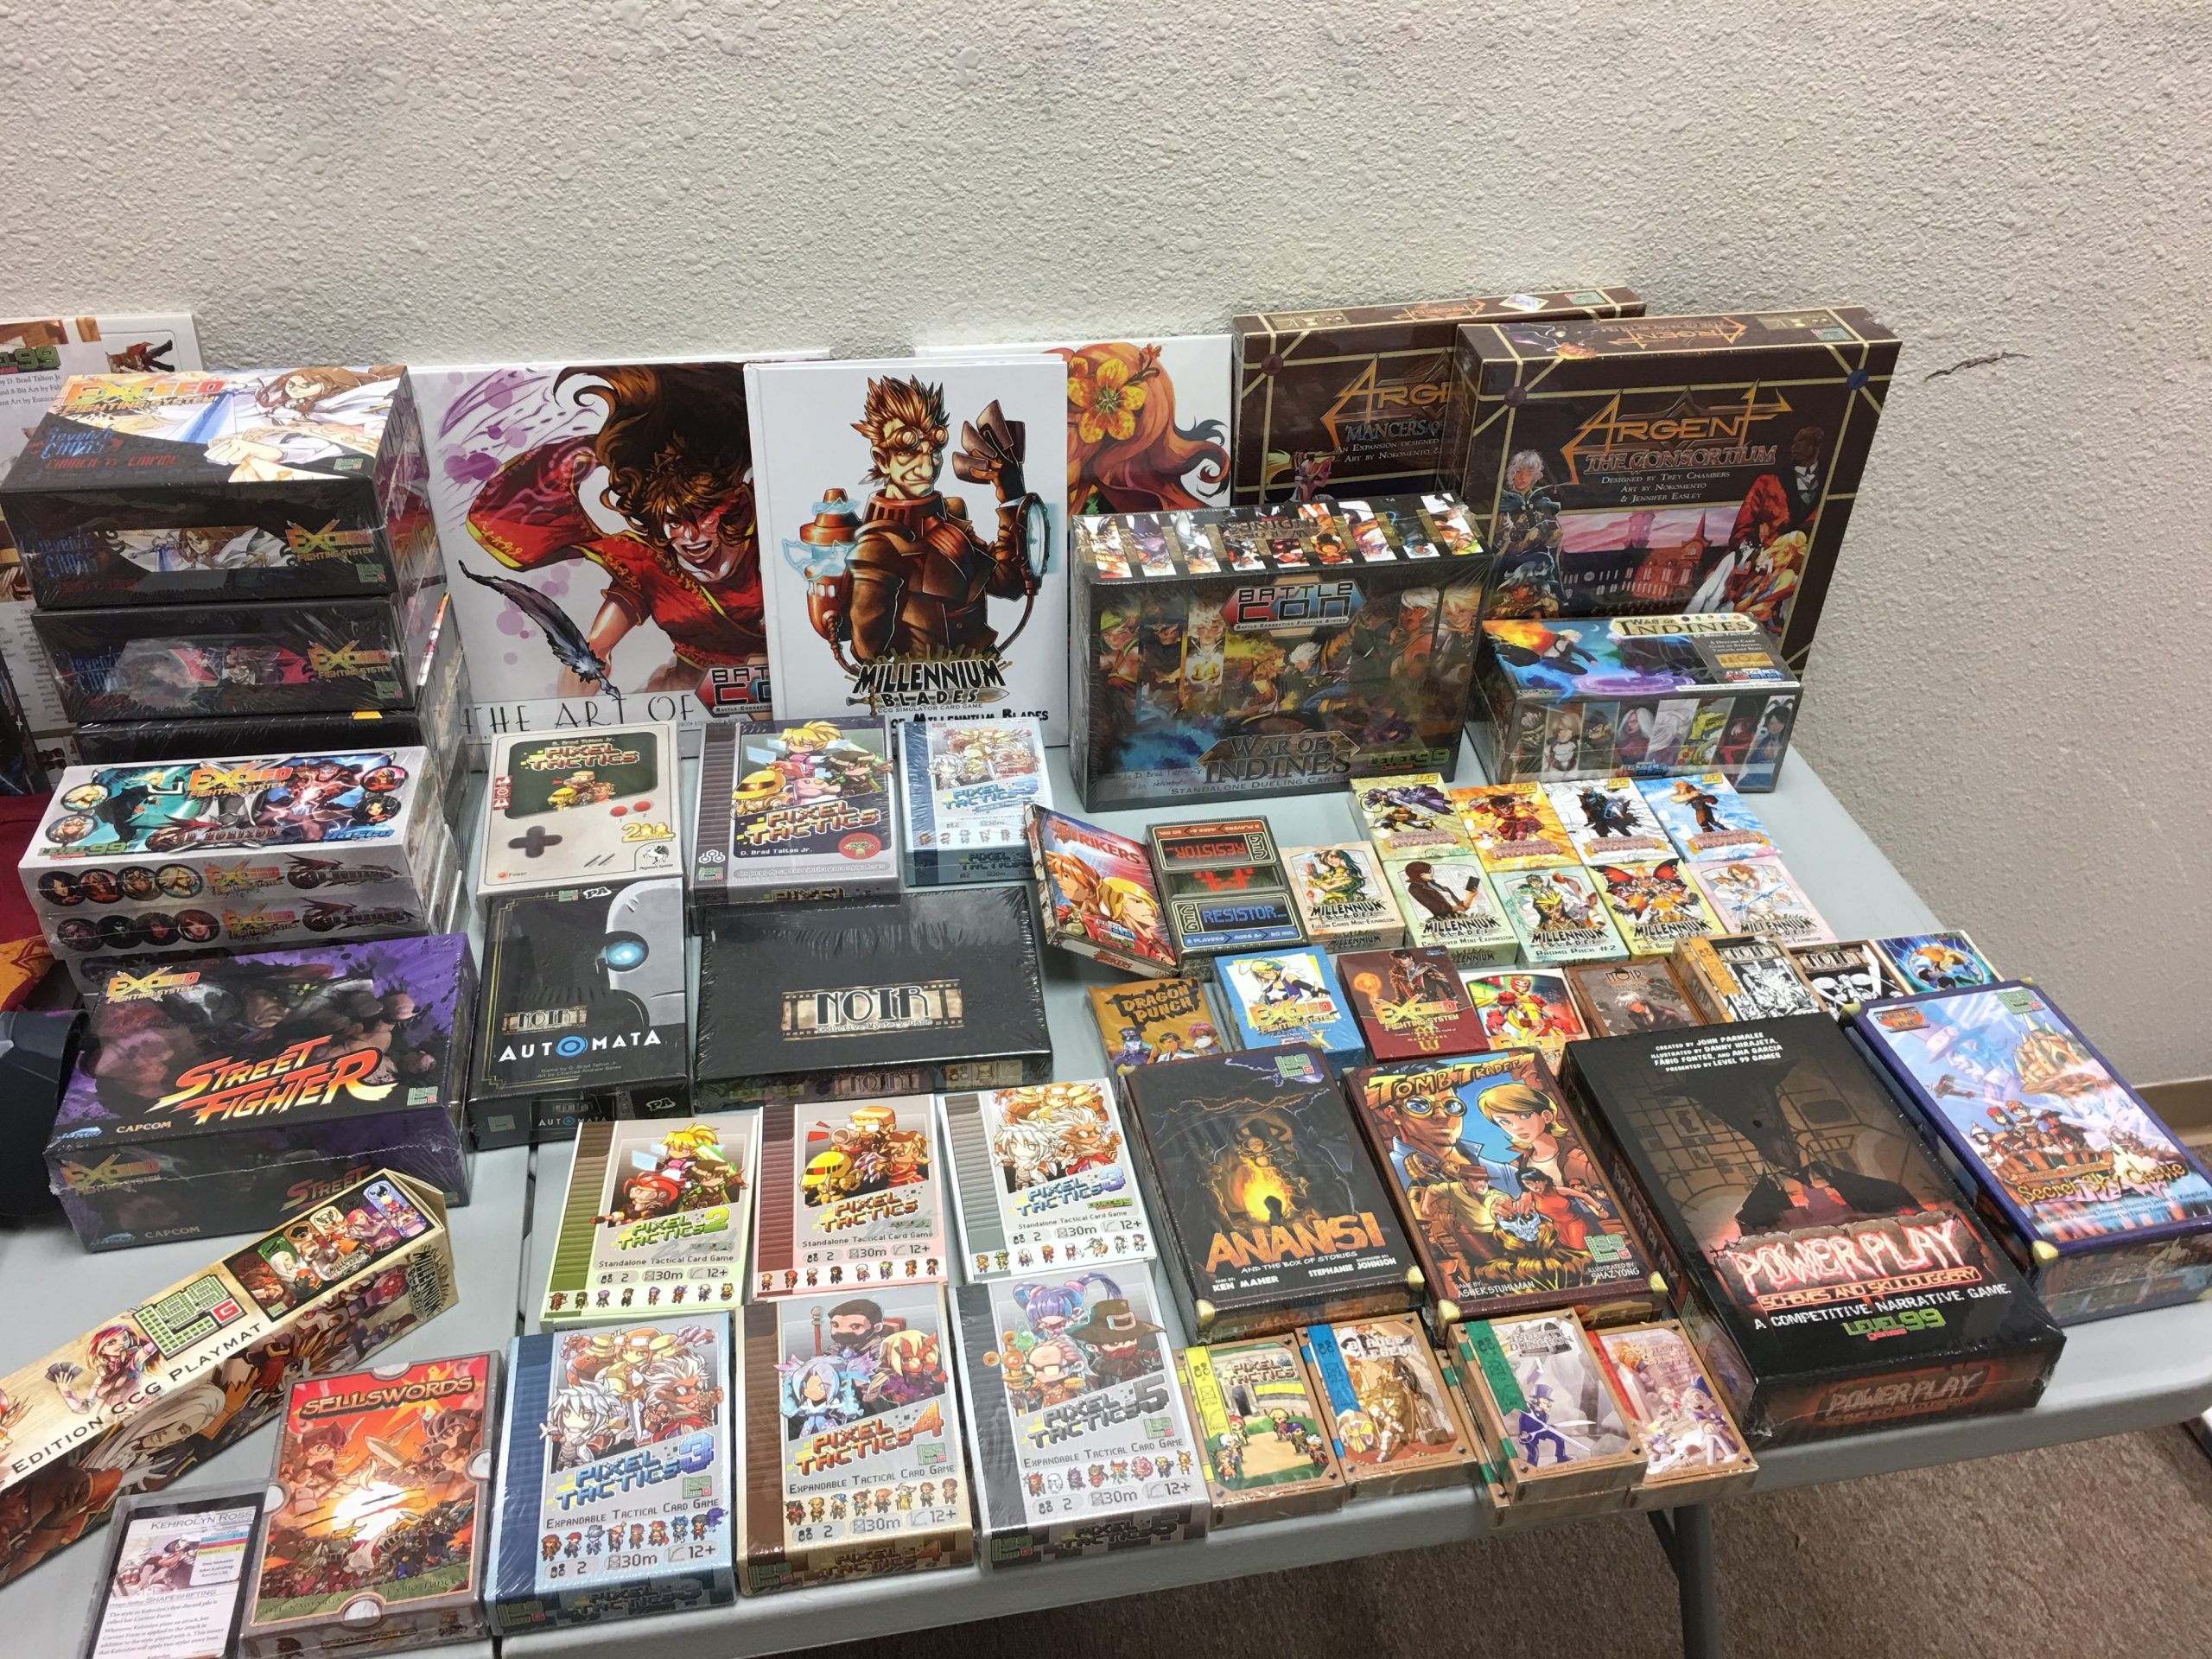 stacks of game boxes on a display table